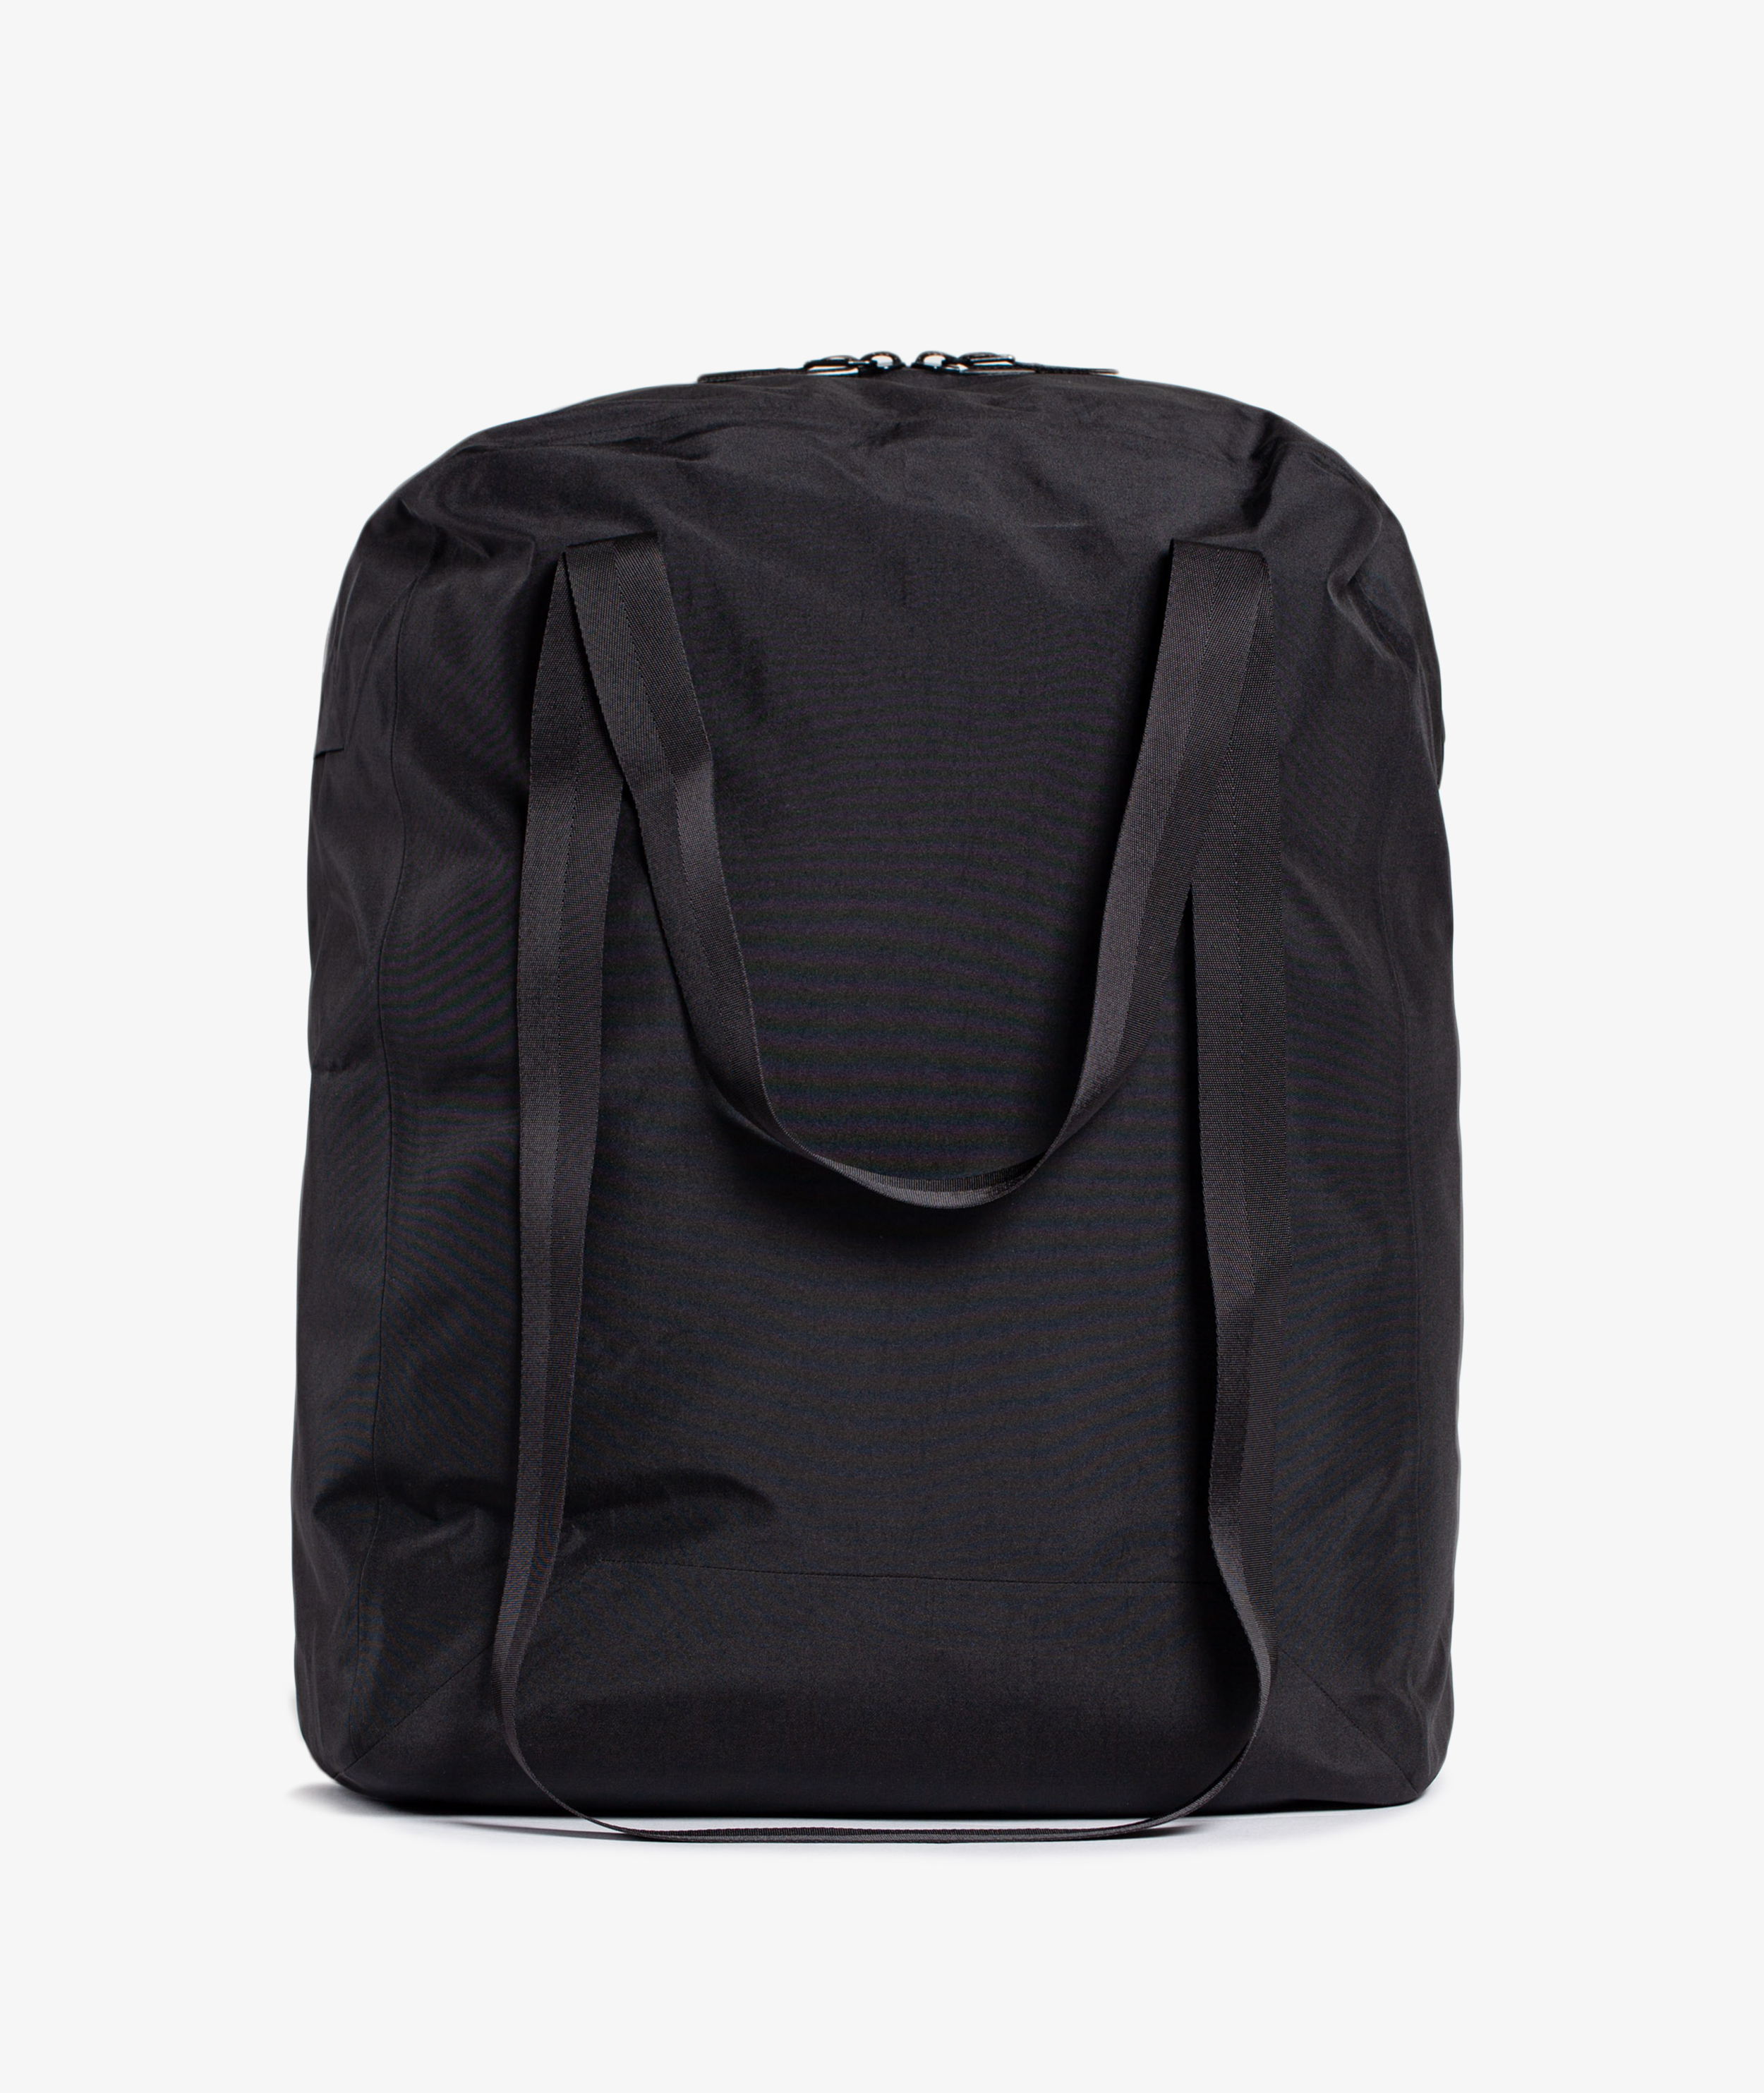 Norse Store | Shipping Worldwide - Veilance Seque Re-System Tote